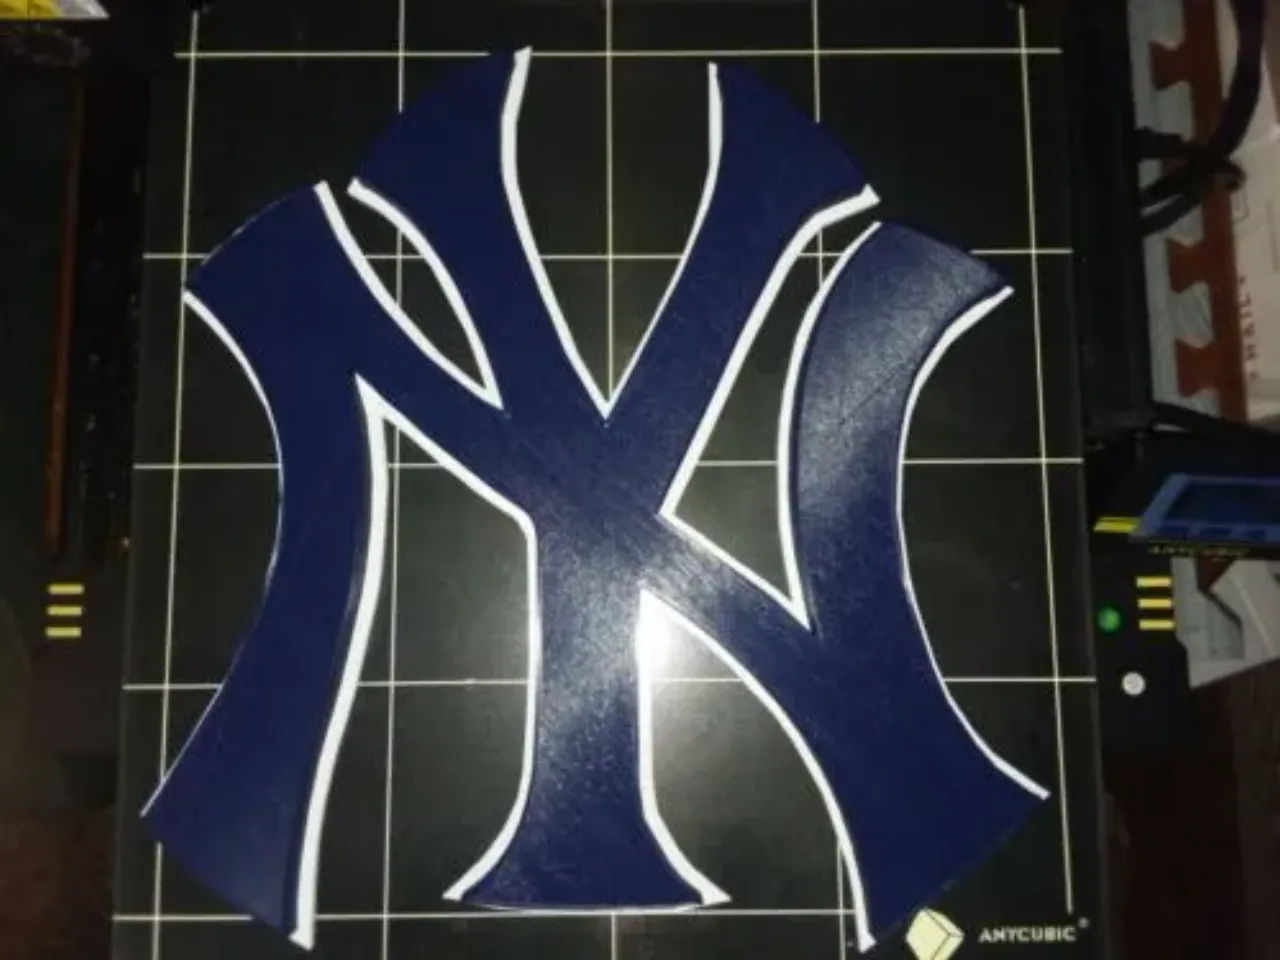 360 Yankees Logo Images, Stock Photos, 3D objects, & Vectors